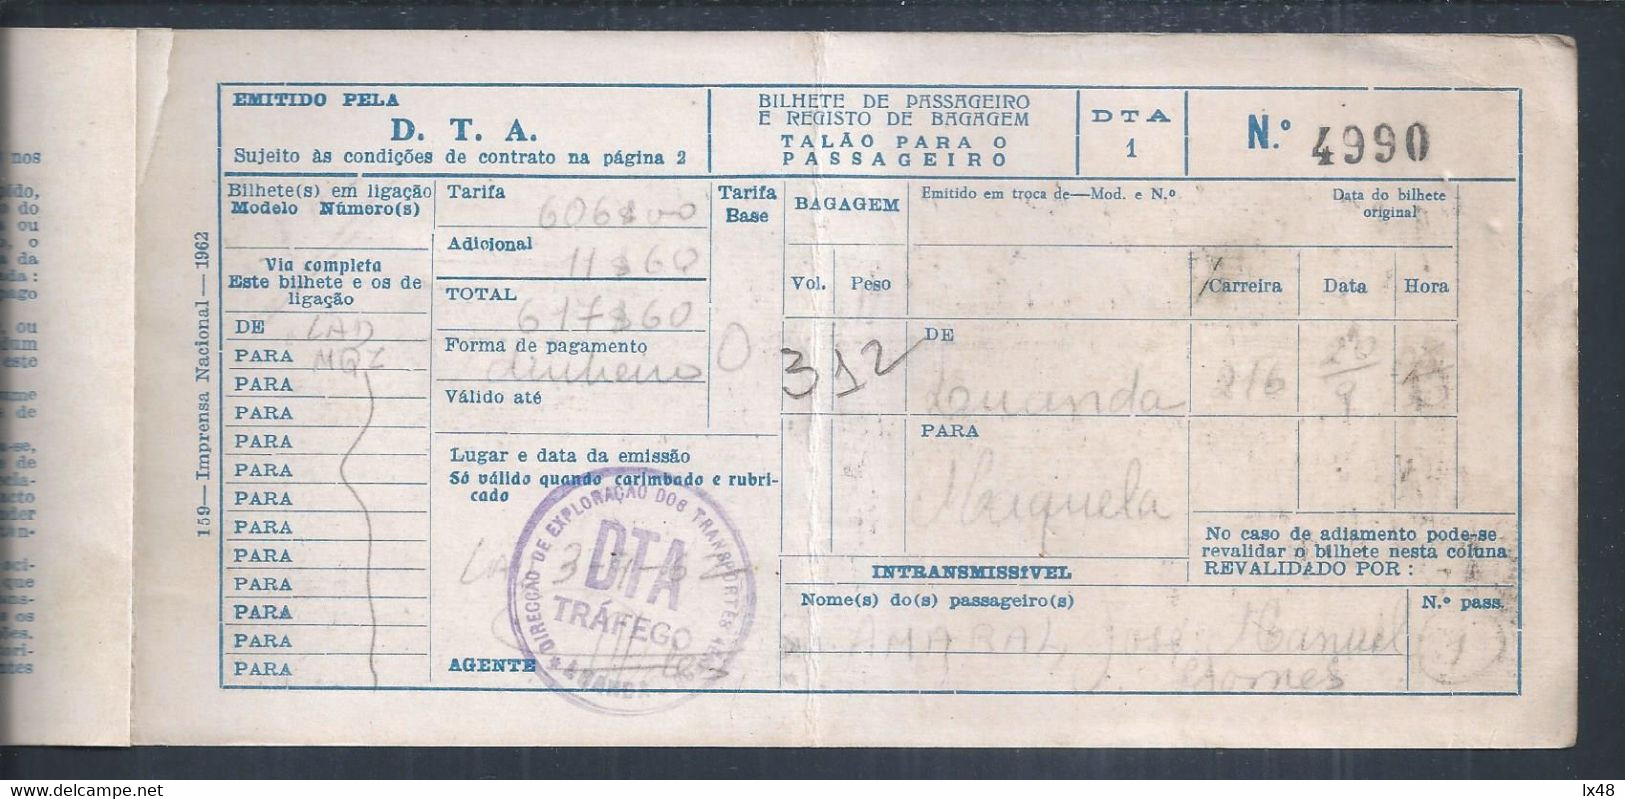 Rare Plane Ticket From DTA - Directorate Of Transports Aéreos De Angola From Luanda To Maquela 1945. Flugticket Von DTA - World